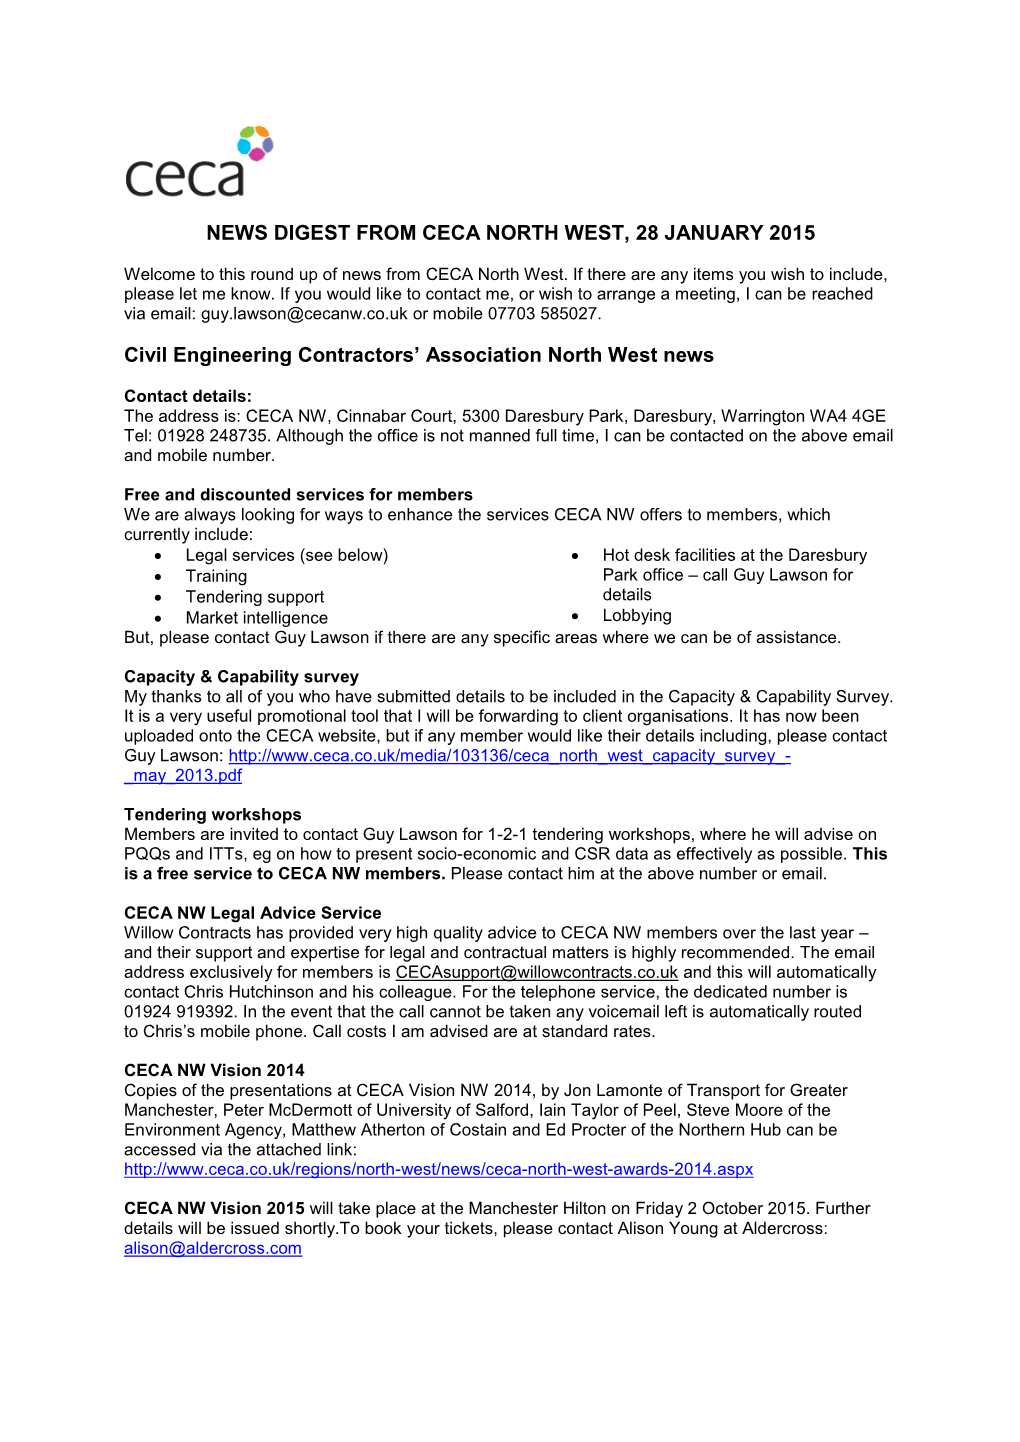 NEWS DIGEST from CECA NORTH WEST, 28 JANUARY 2015 Civil